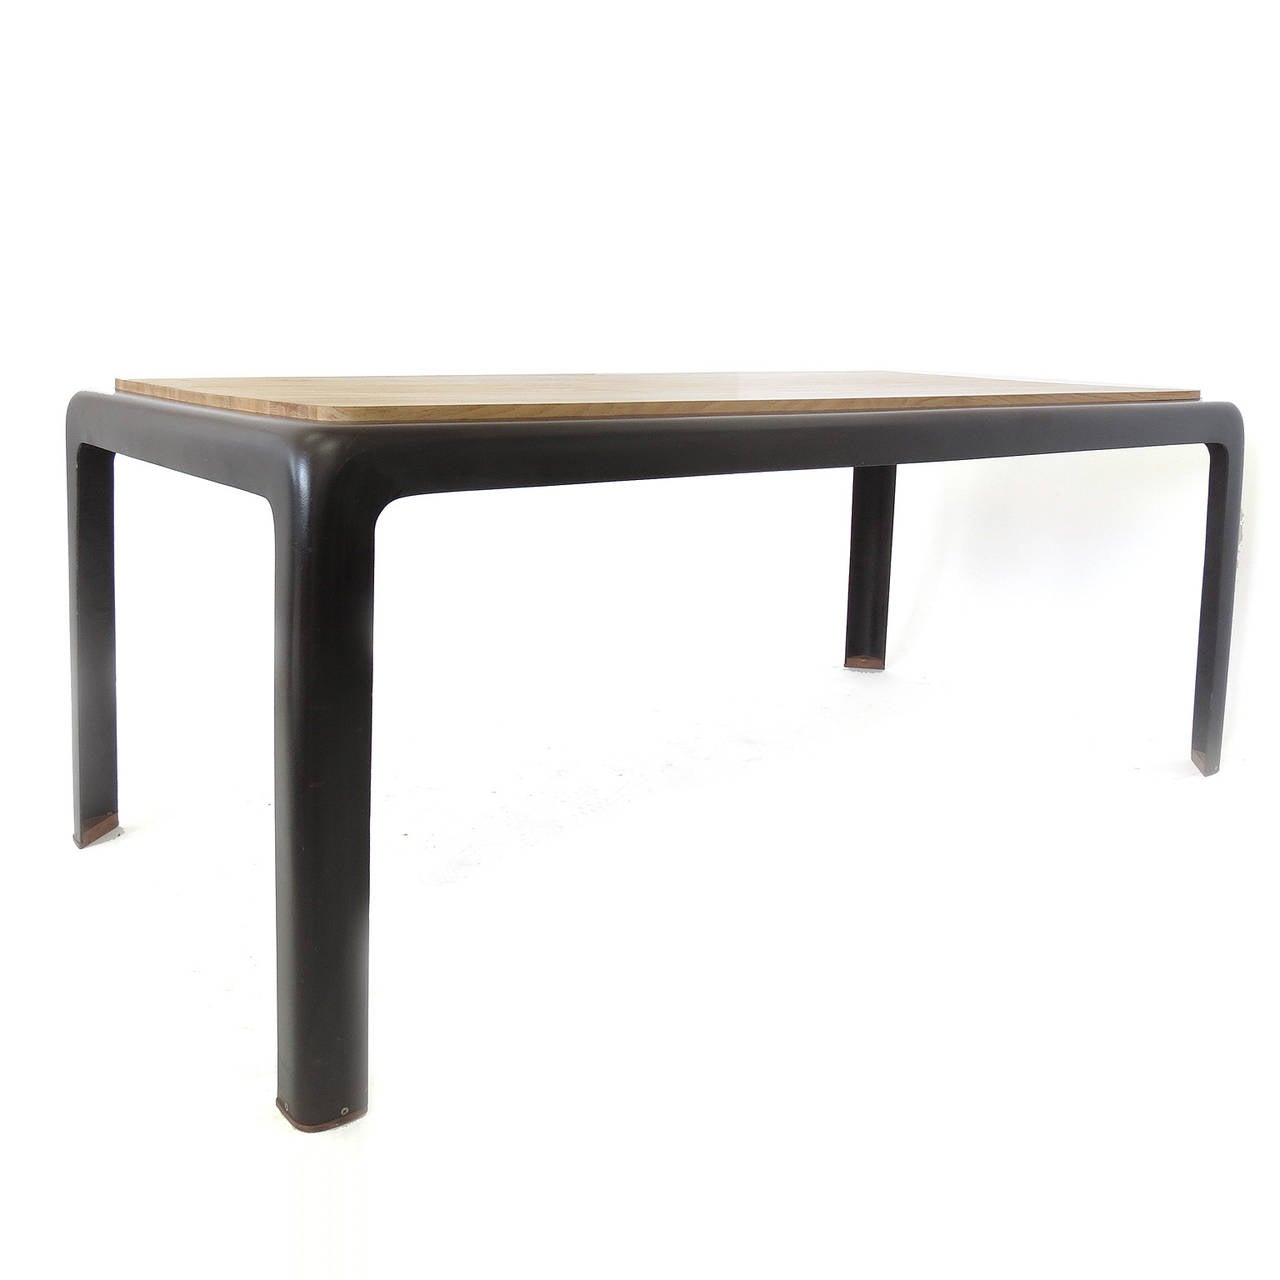 Unique brown fiberglass and oak table or desk with a wooden feet detail.